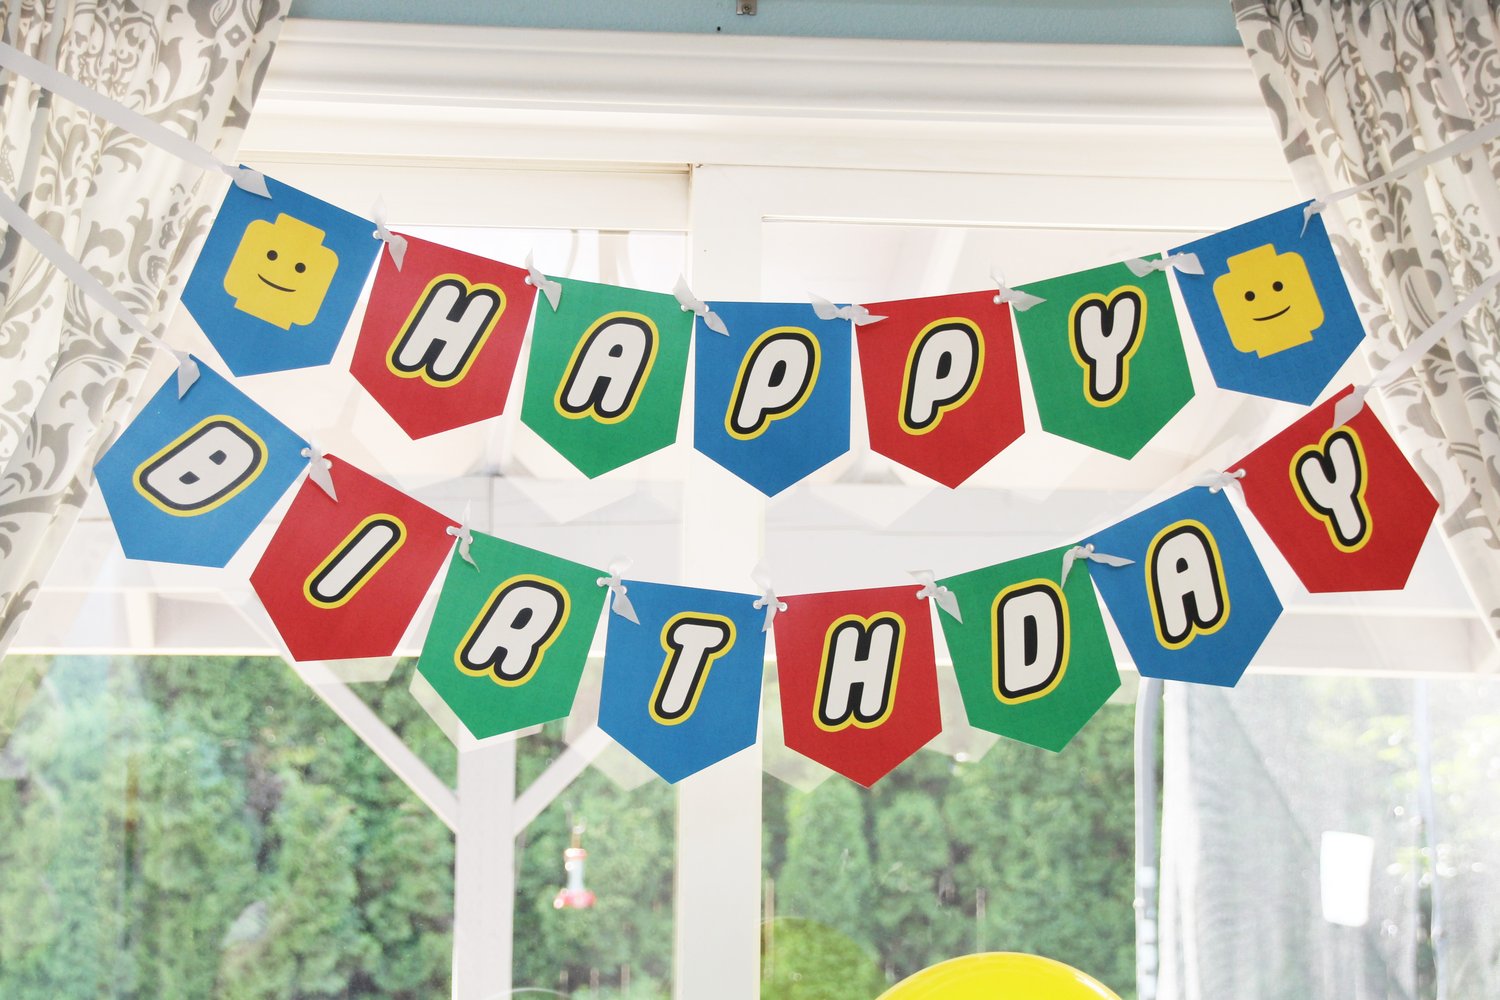 free-lego-inspired-party-printable-decorations-instant-download-5m